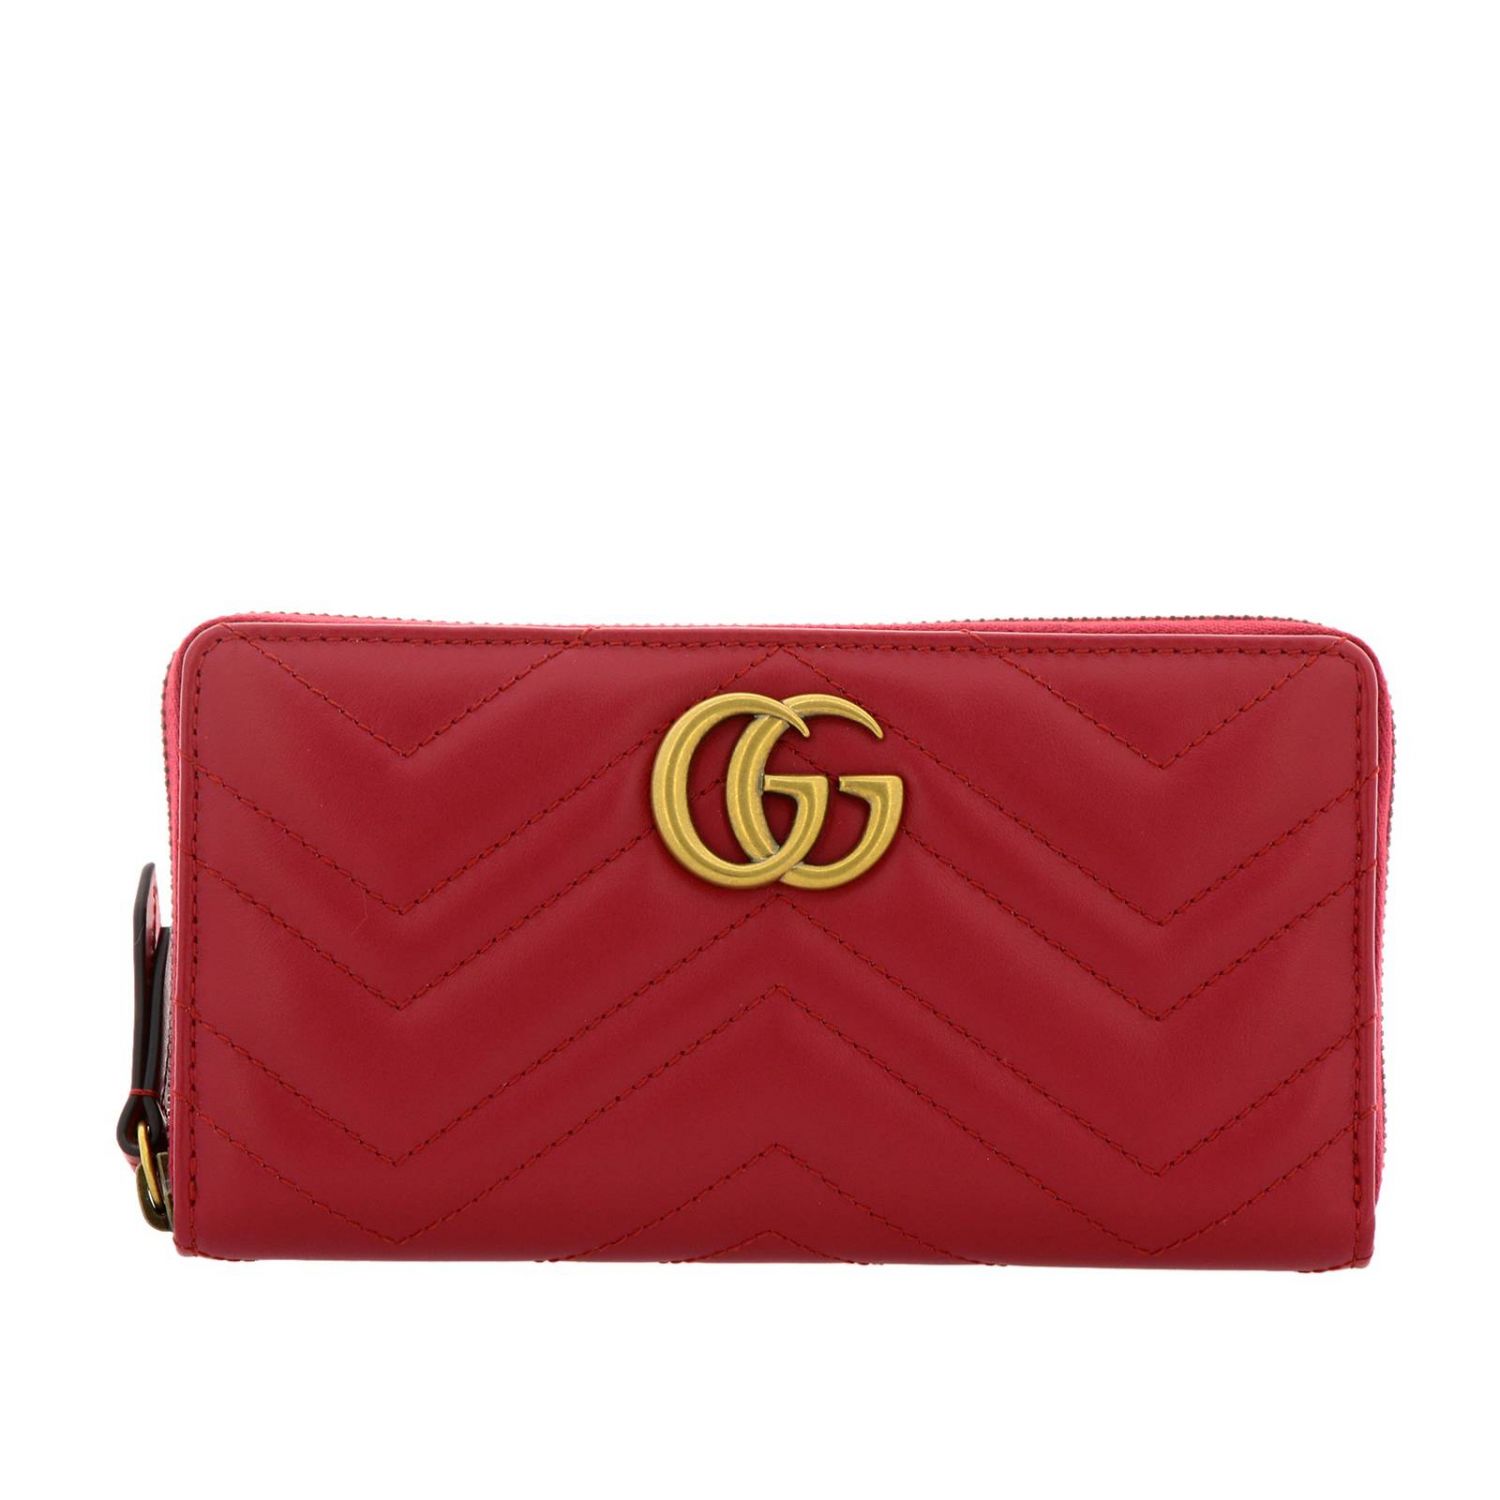 GUCCI: wallet for women - Red | Gucci wallet 443123 DTD1T online on ...